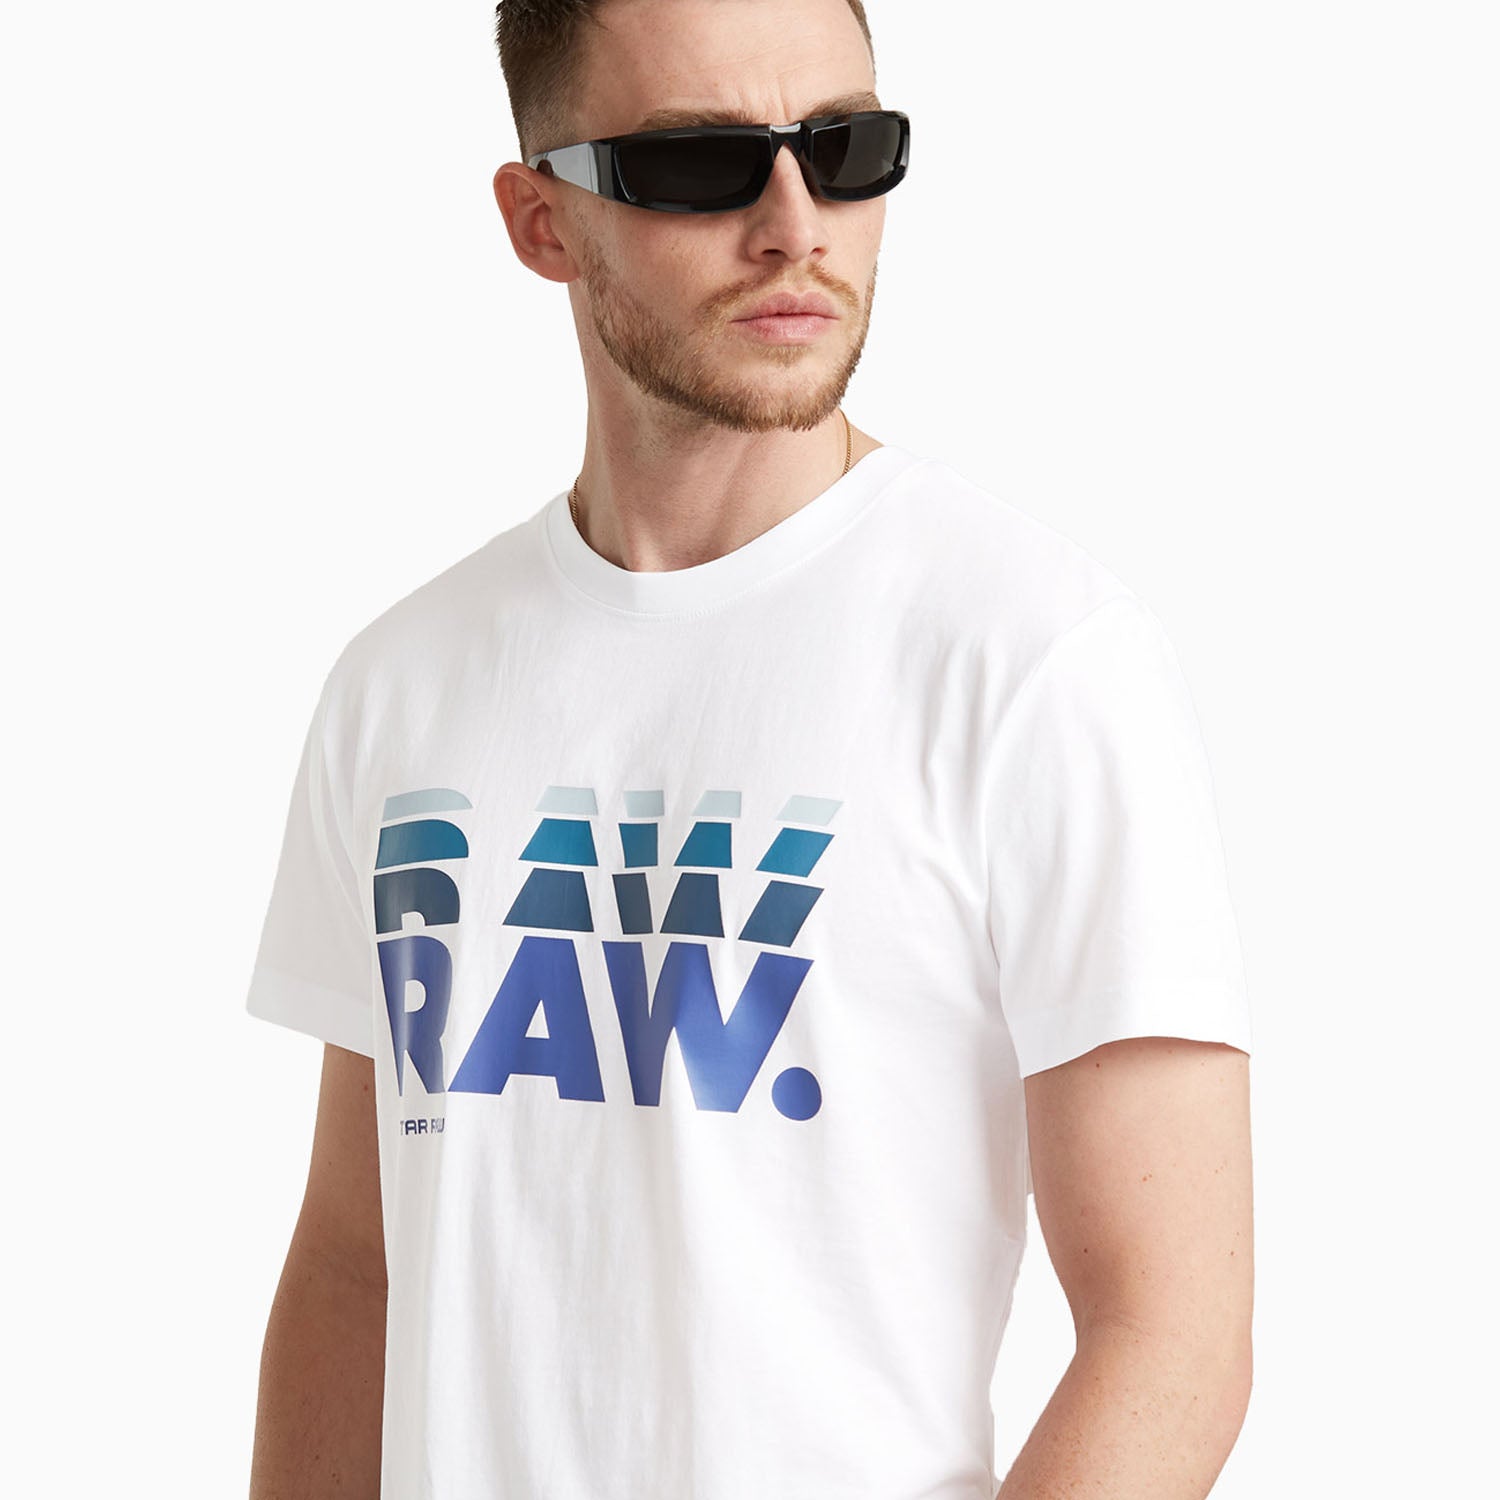 g-star-raw-mens-g-star-graphic-crew-neck-t-shirt-d25497-336-110